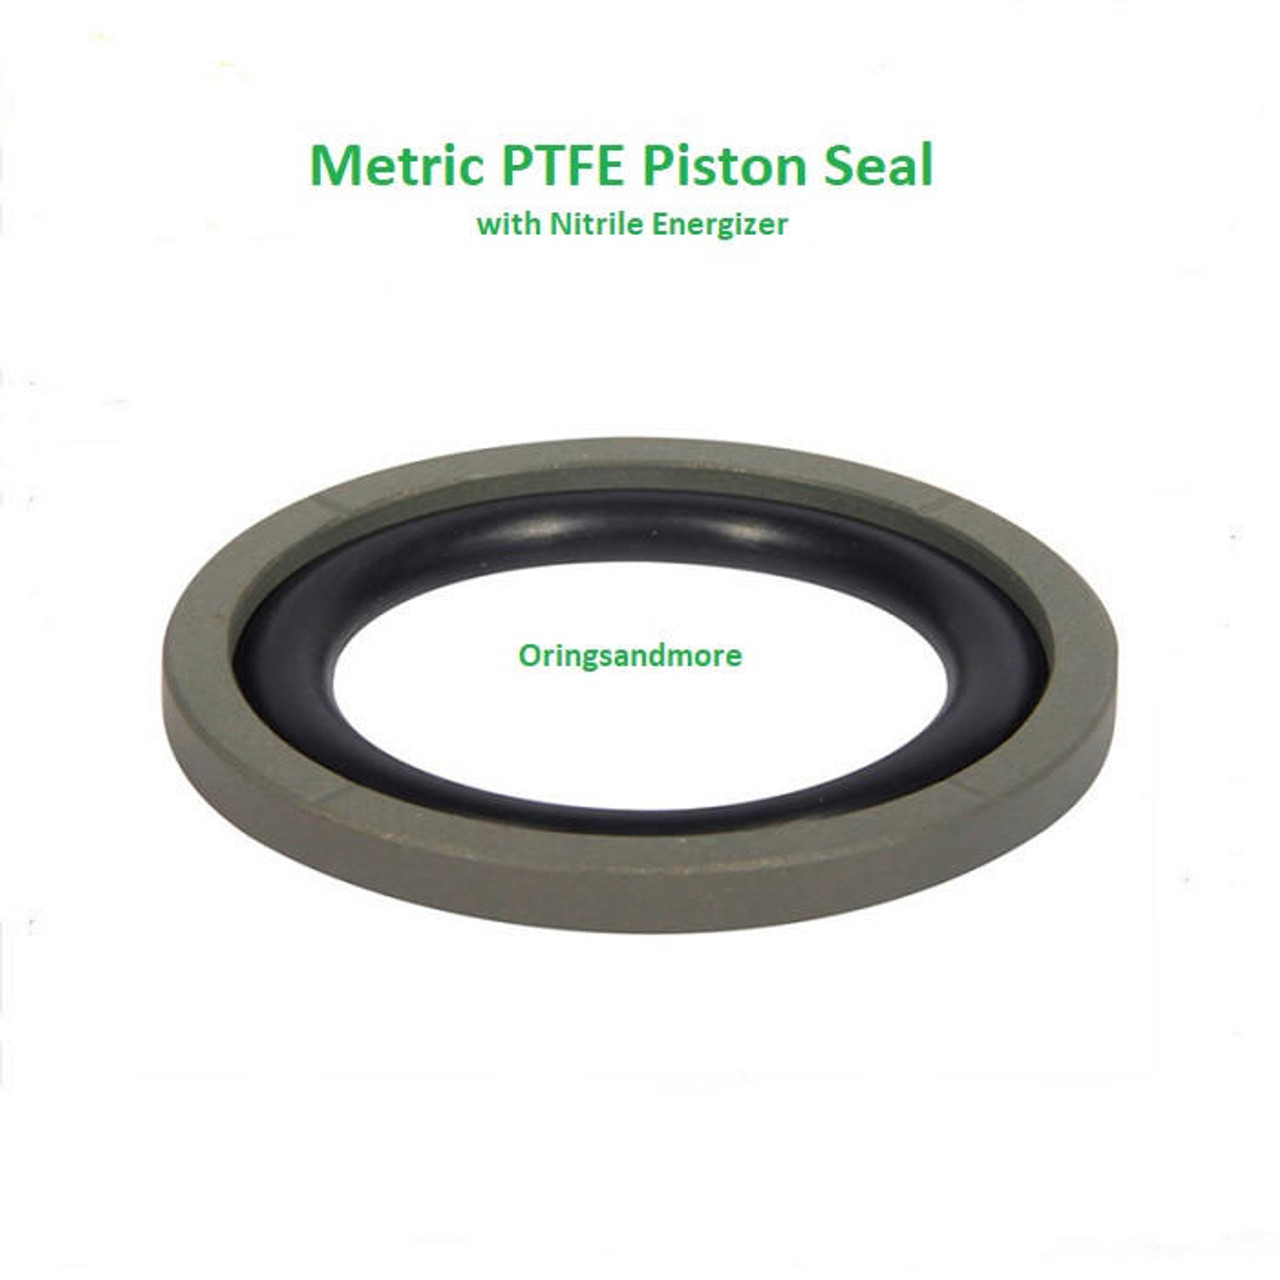 PTFE Piston Seal 16mm OD x 11.1mm ID x 2.2mm   Price for 1 pc